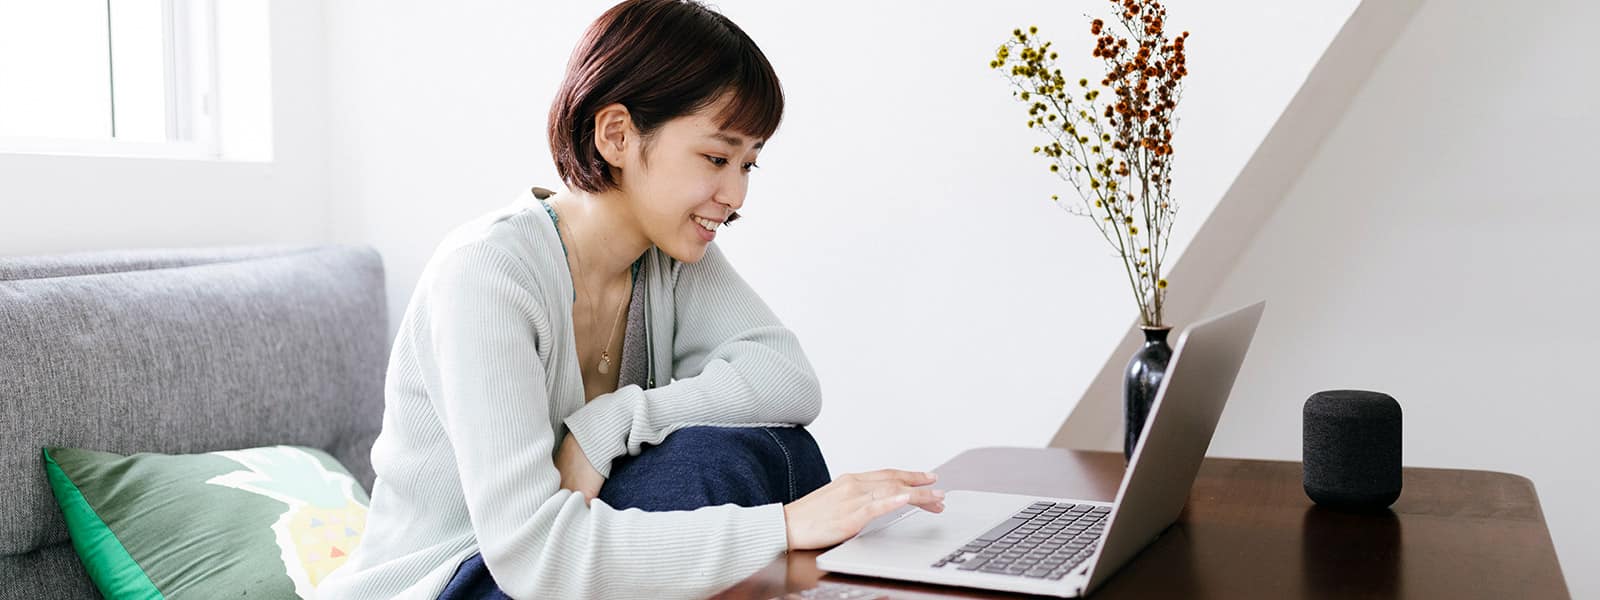 a woman smiles as she sits on a couch and uses her laptop, suggesting that she is glad to be freeing up her computer’s RAM